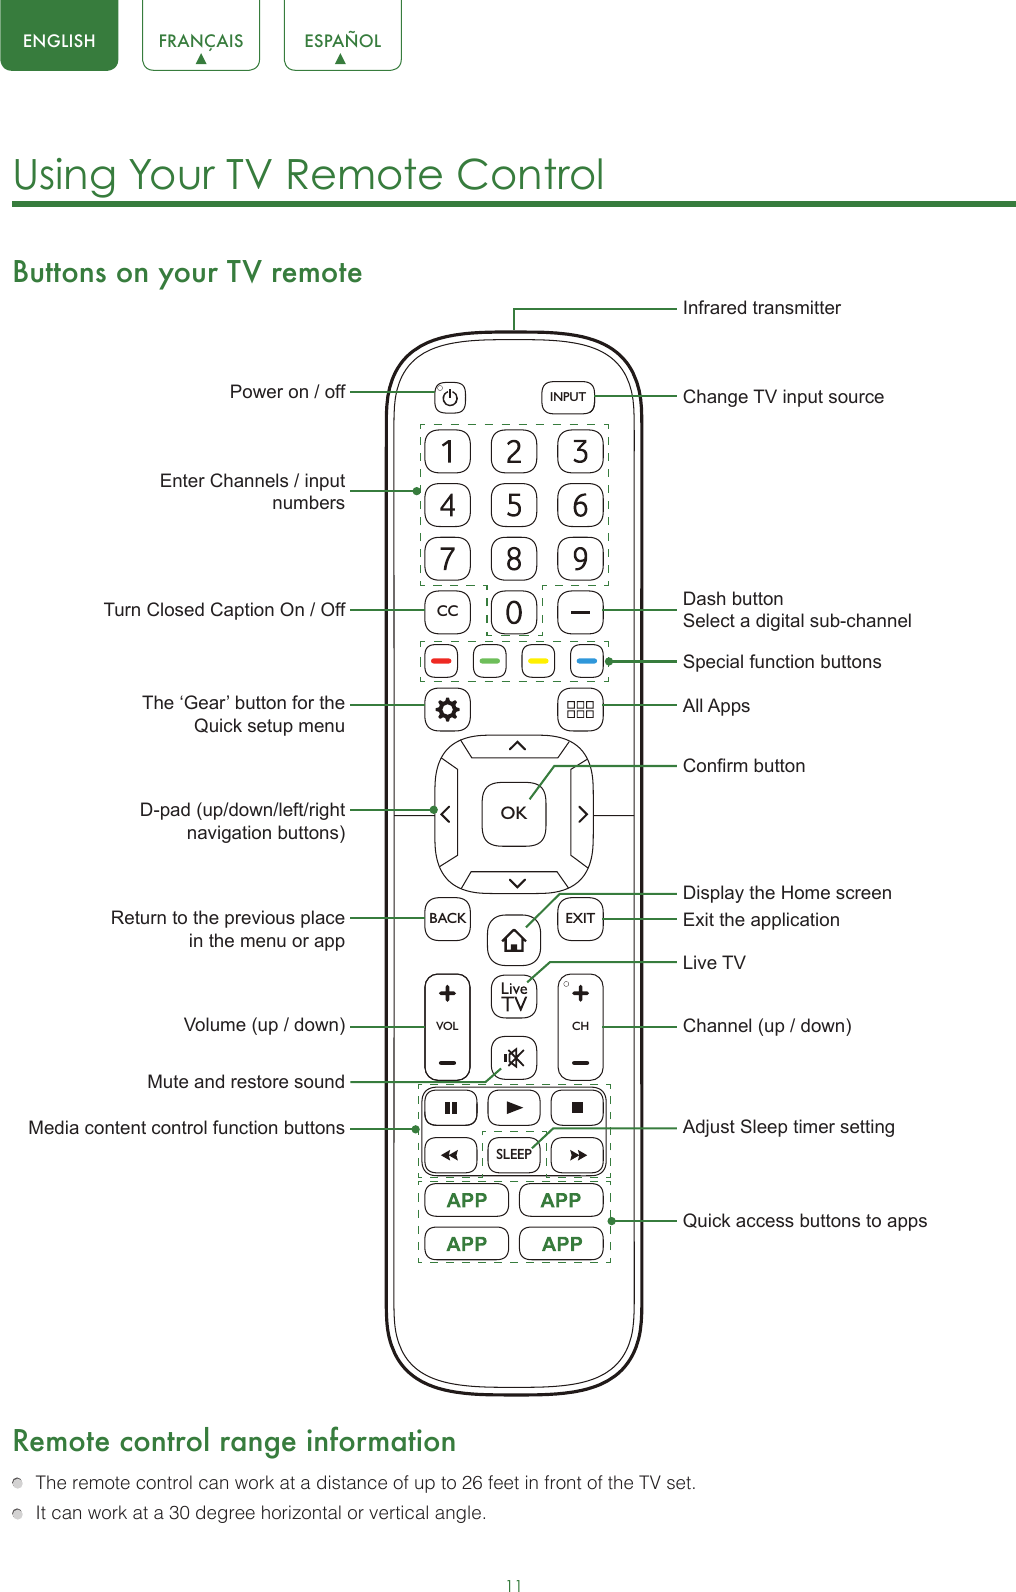 11ENGLISH FRANÇAIS ESPAÑOLUsing Your TV Remote Control Buttons on your TV remoteRemote control range information  The remote control can work at a distance of up to 26 feet in front of the TV set.  It can work at a 30 degree horizontal or vertical angle.SLEEPVOLCHOKCCBACK EXITINPUTPower on / offEnter Channels / input numbersMedia content control function buttonsDash button Select a digital sub-channelD-pad (up/down/left/right navigation buttons)Volume (up / down)Mute and restore soundAdjust Sleep timer settingThe ‘Gear’ button for the Quick setup menuReturn to the previous place in the menu or appLive TVInfrared transmitterChange TV input sourceChannel (up / down)Exit the applicationTurn Closed Caption On / OffSpecial function buttonsAll AppsDisplay the Home screenConrm buttonQuick access buttons to apps